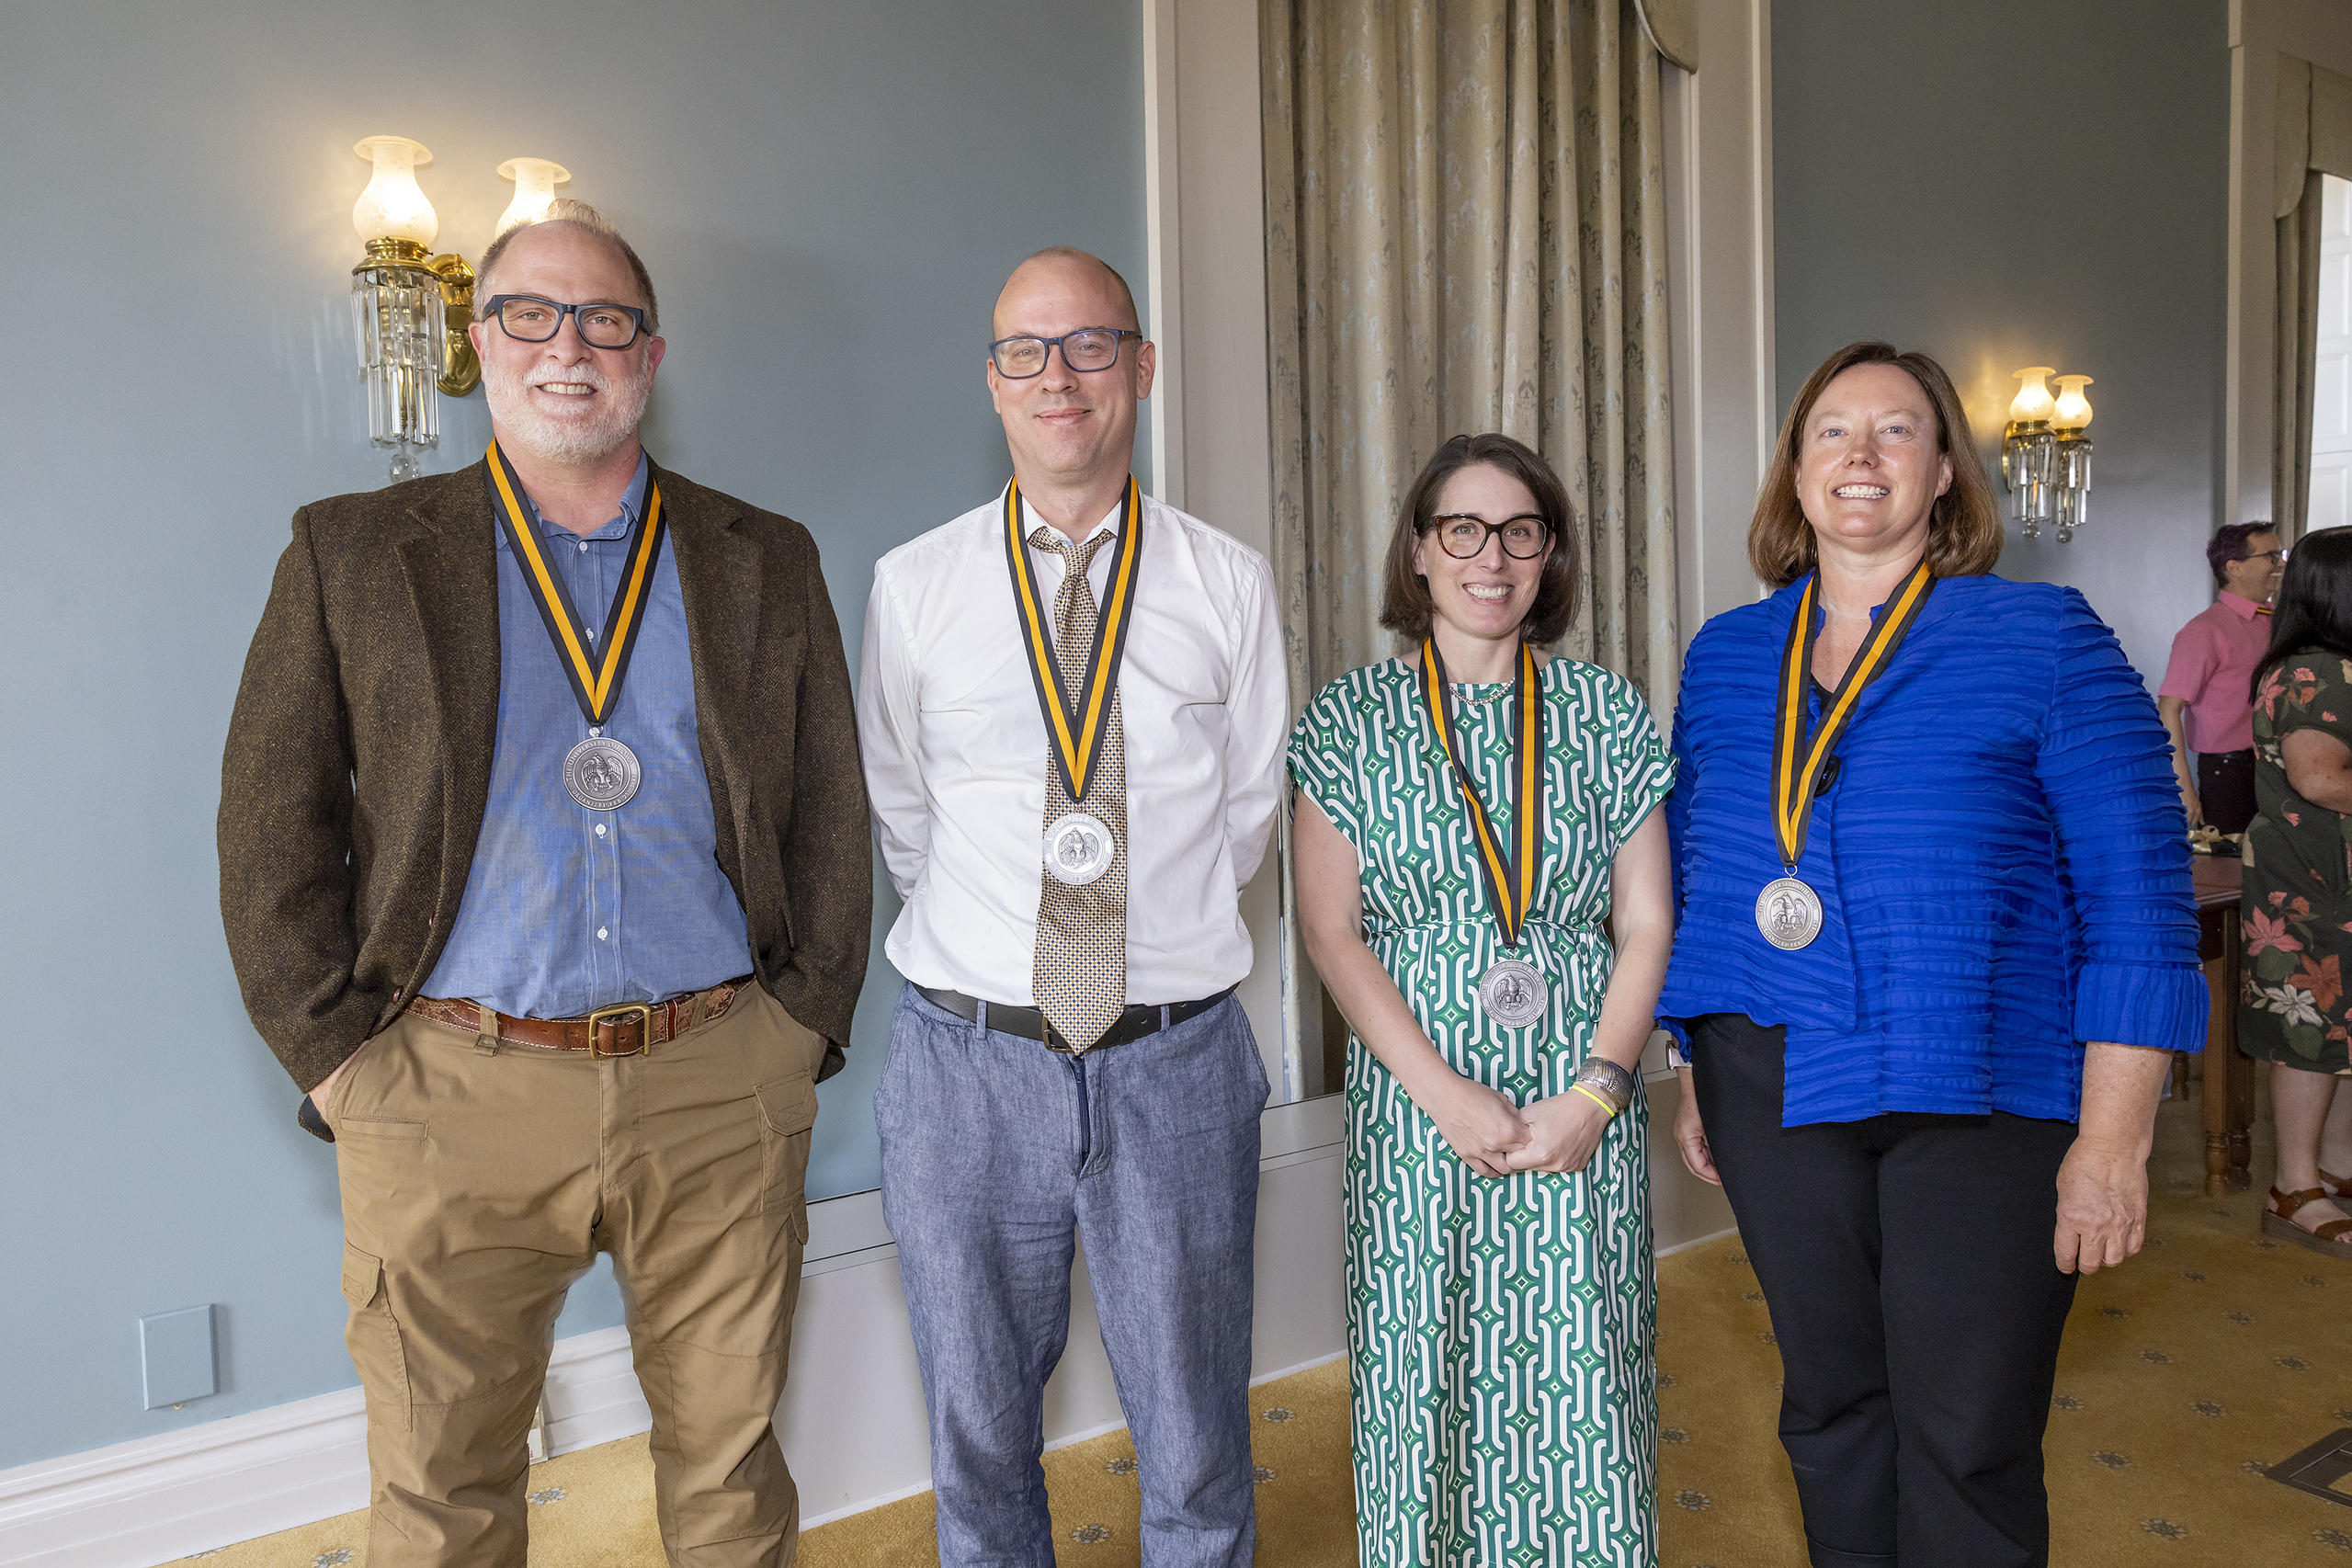 A group shot of the classics professors with medals around their necks